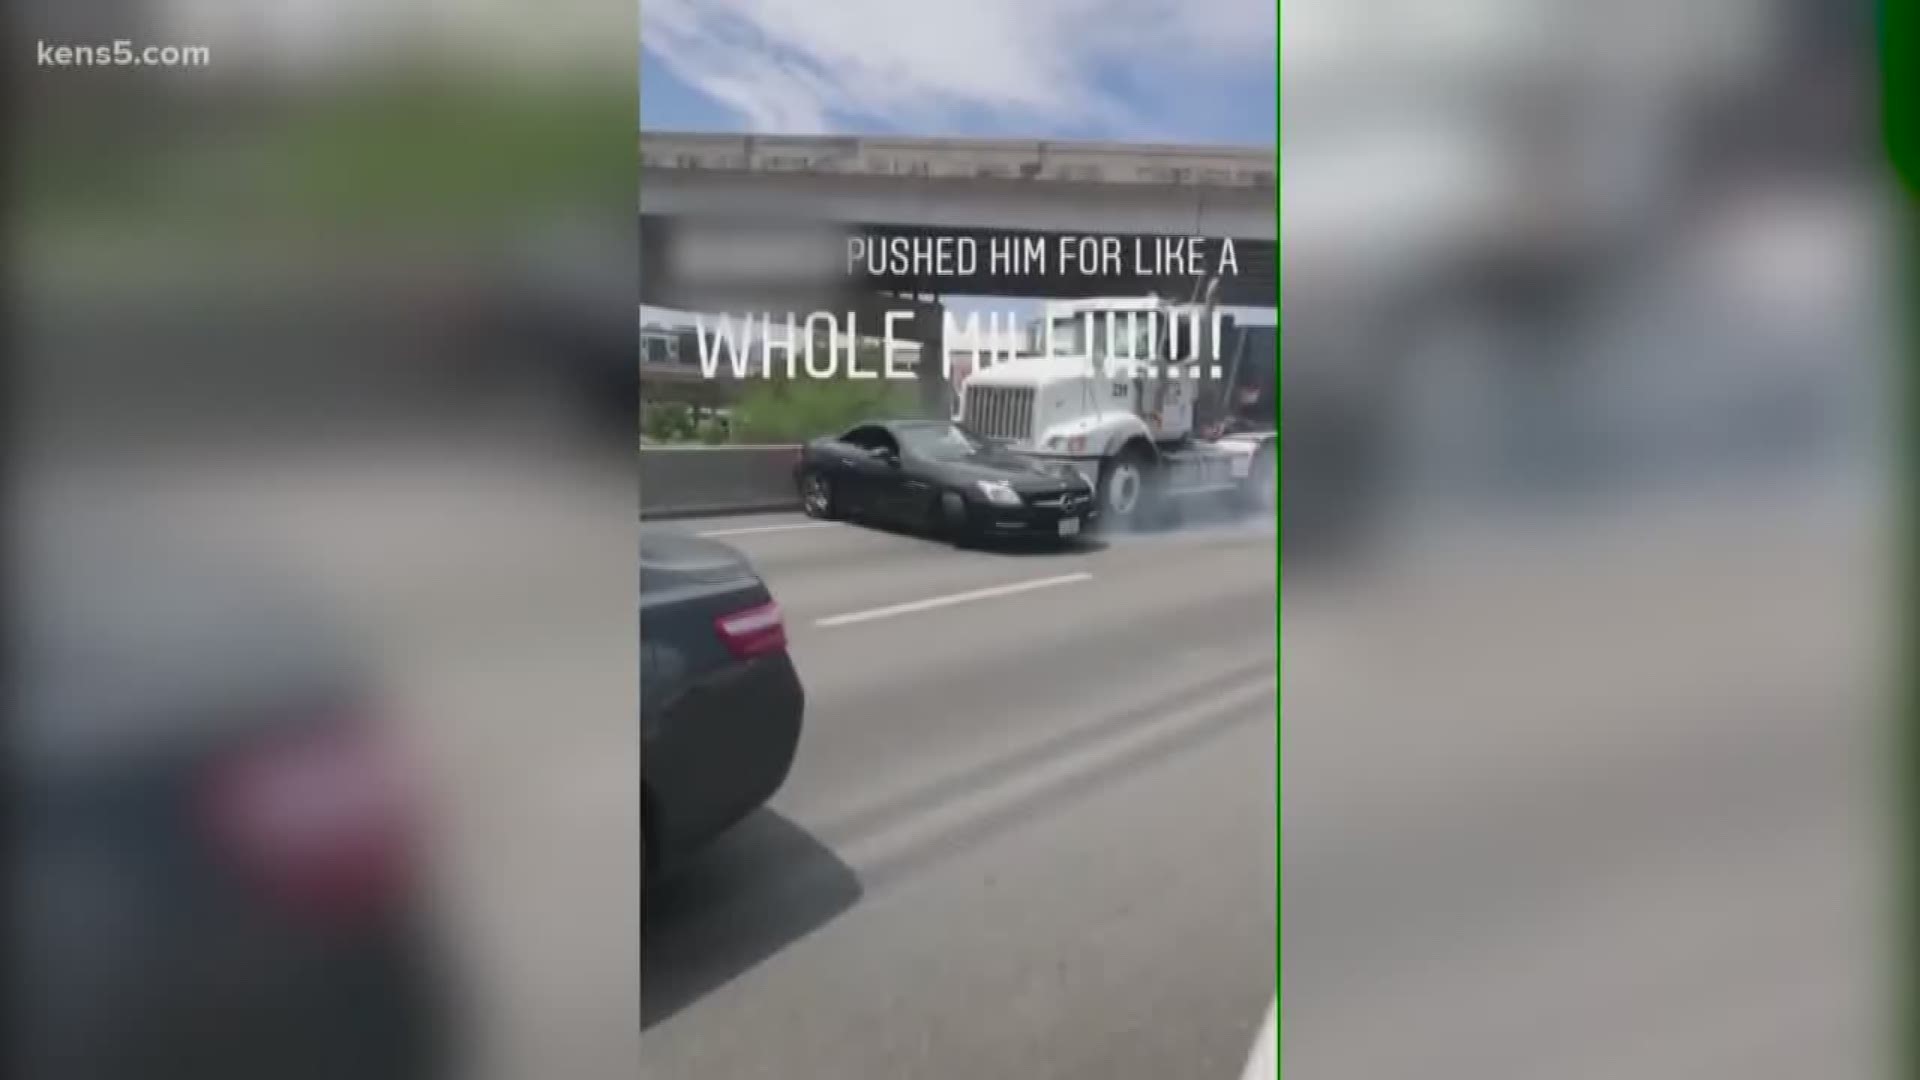 A big rig drags a car along a San Antonio interstate for nearly a mile- all caught on camera.  Eyewitness News reporter Andrea Martinez spoke to the man who caught the whole incident on his phone.